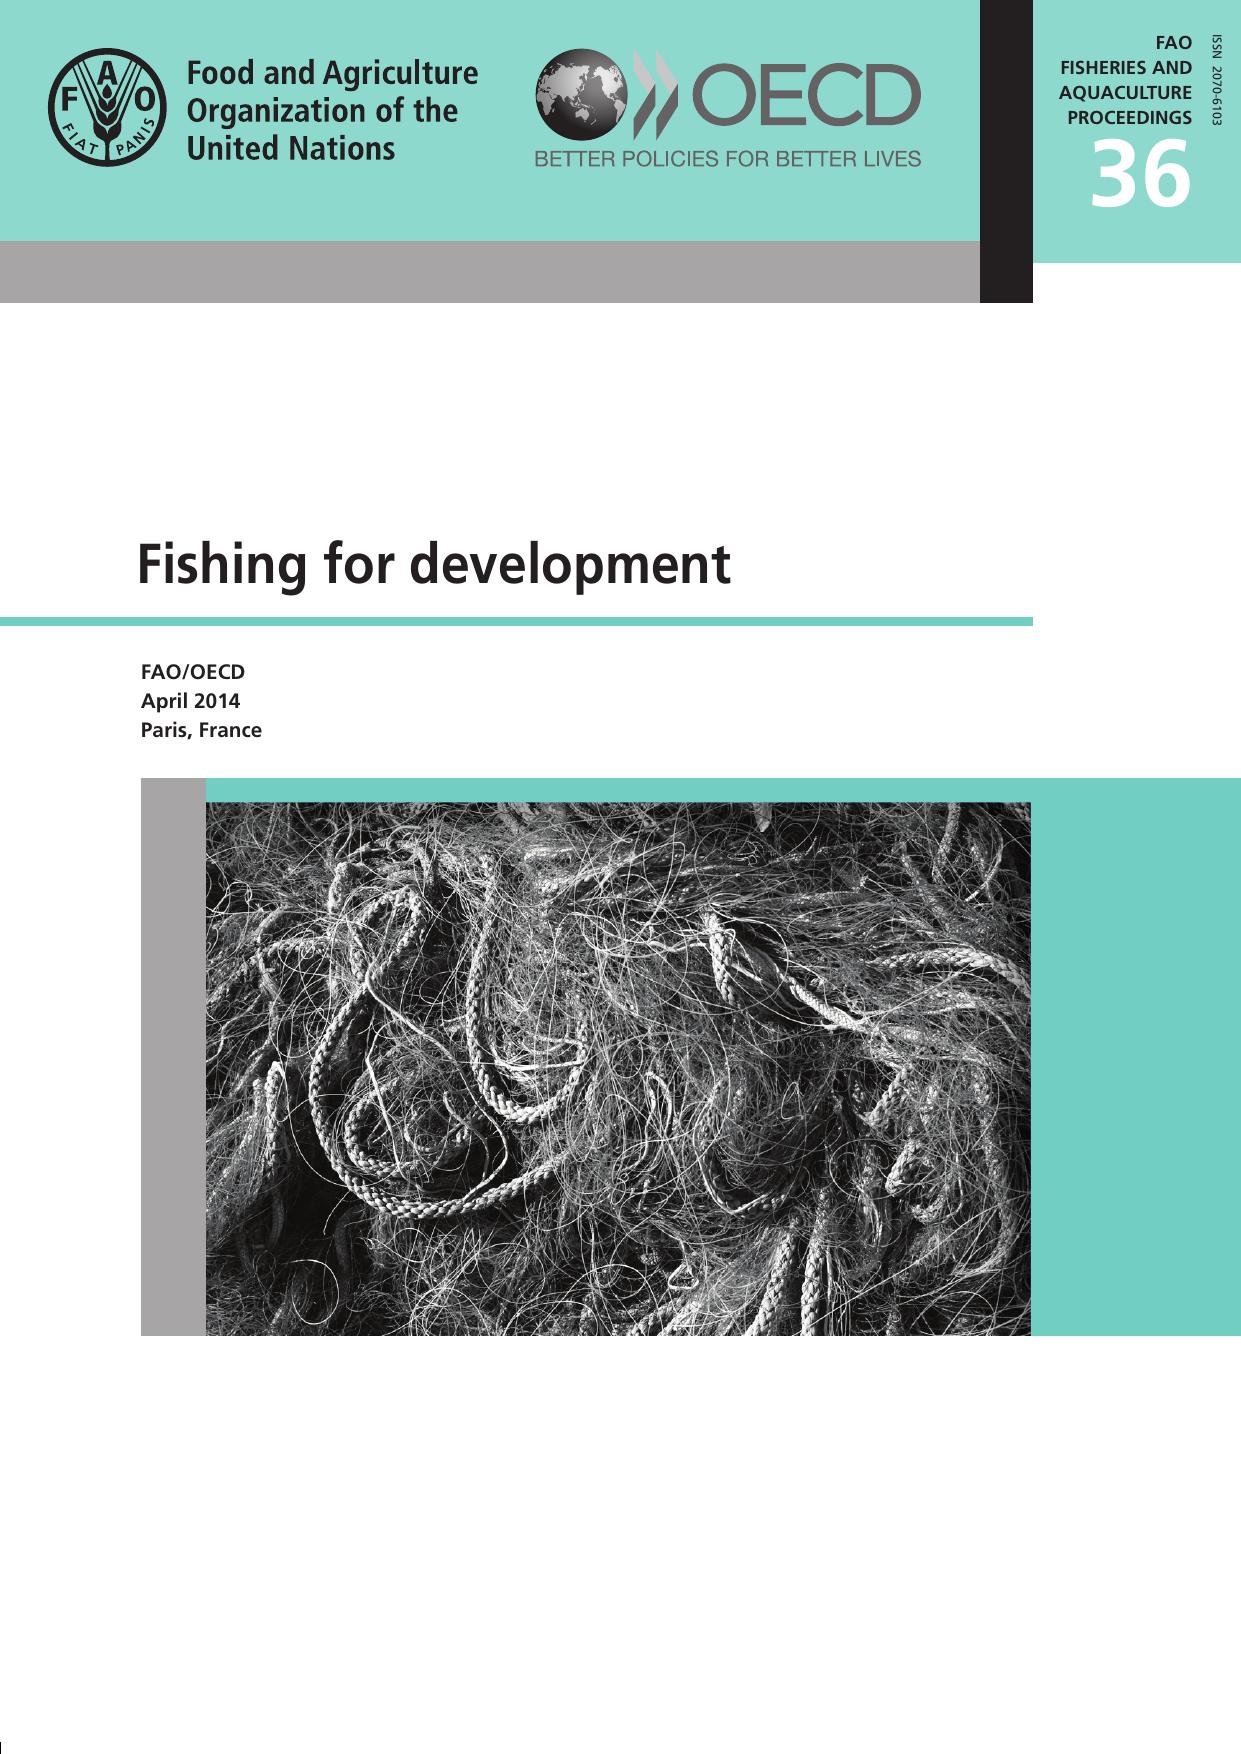 Fishing for development [main conclusions of the Fishing for Development joint meeting, held  2015